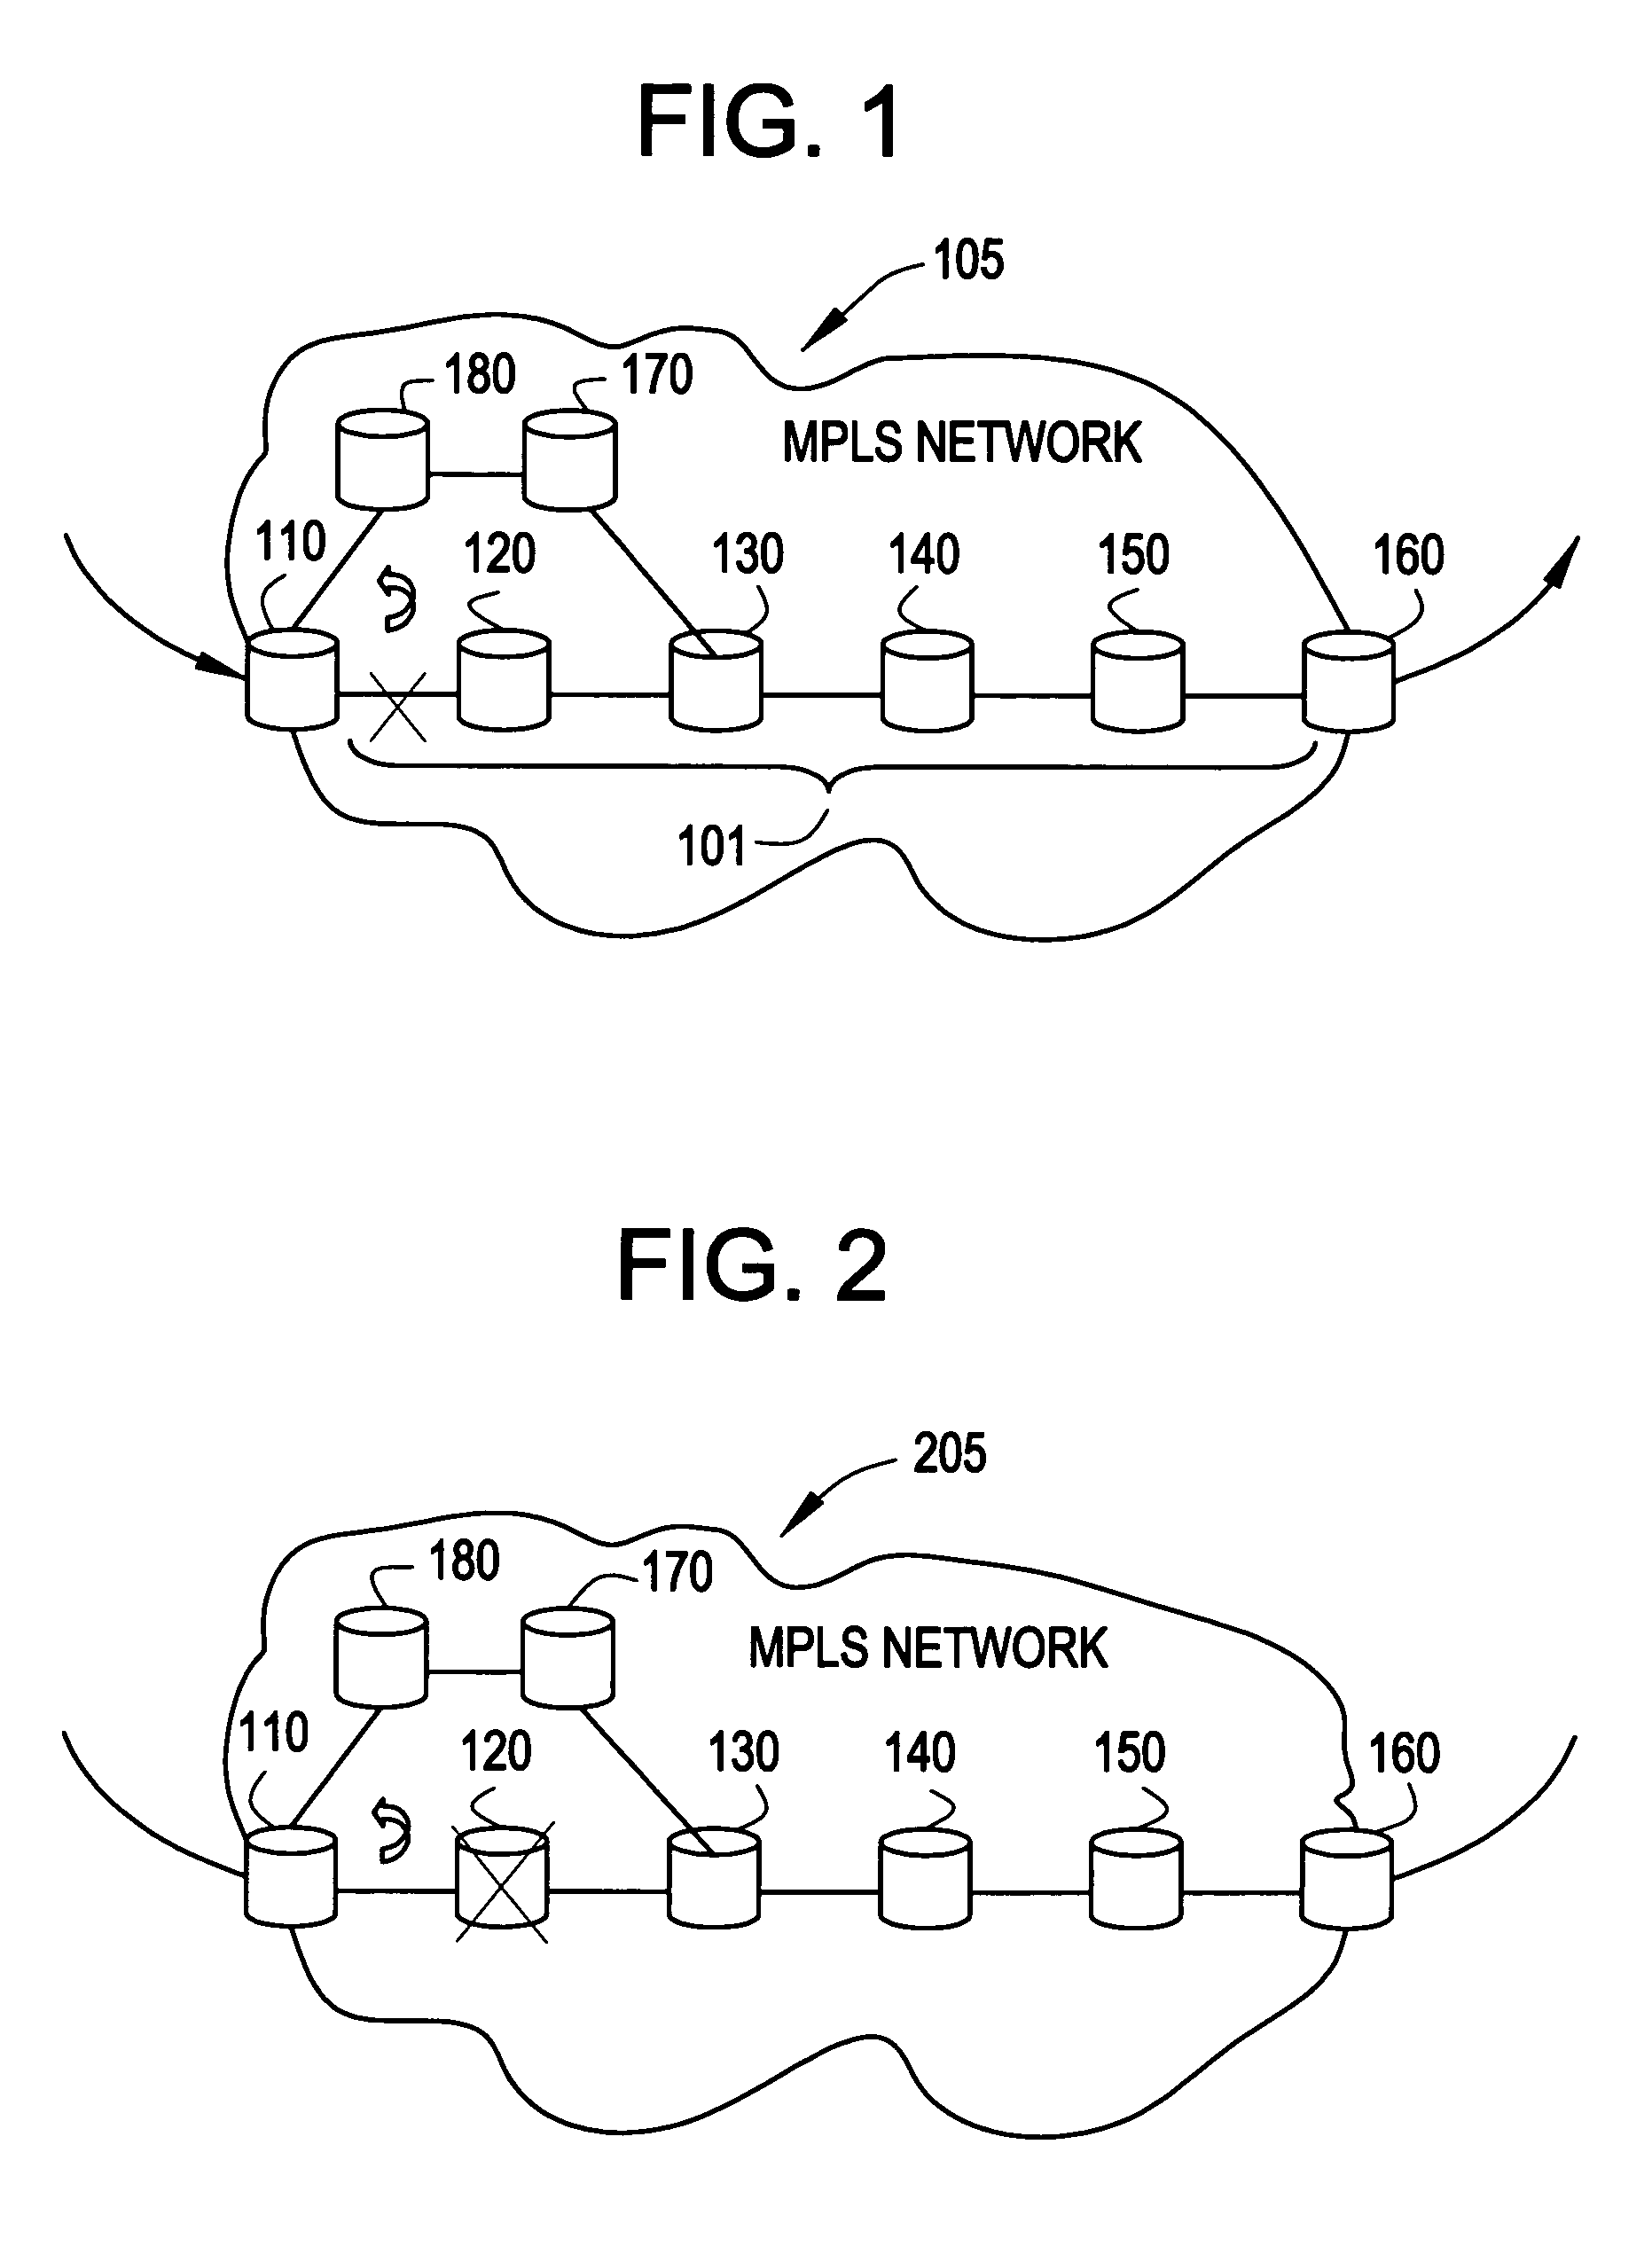 Methods and devices for re-routing MPLS traffic